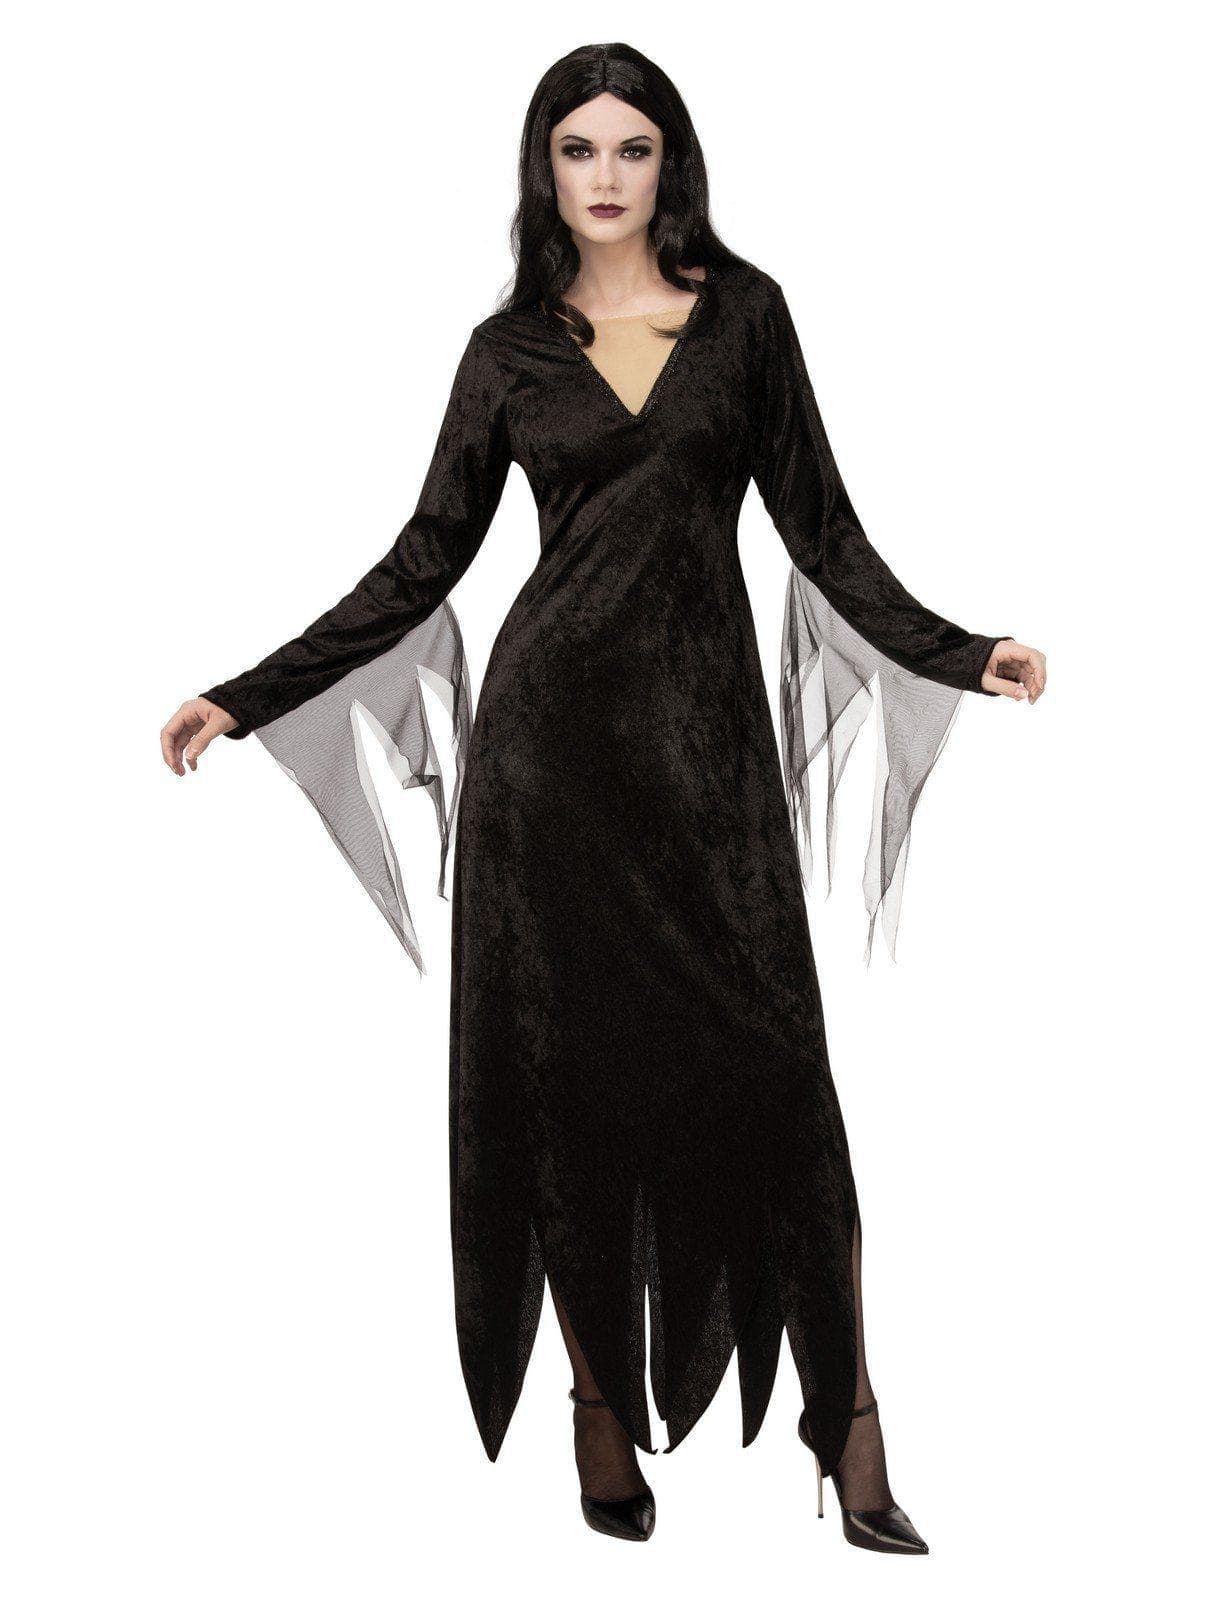 Adult Addams Family Animated Morticia Costume - costumes.com